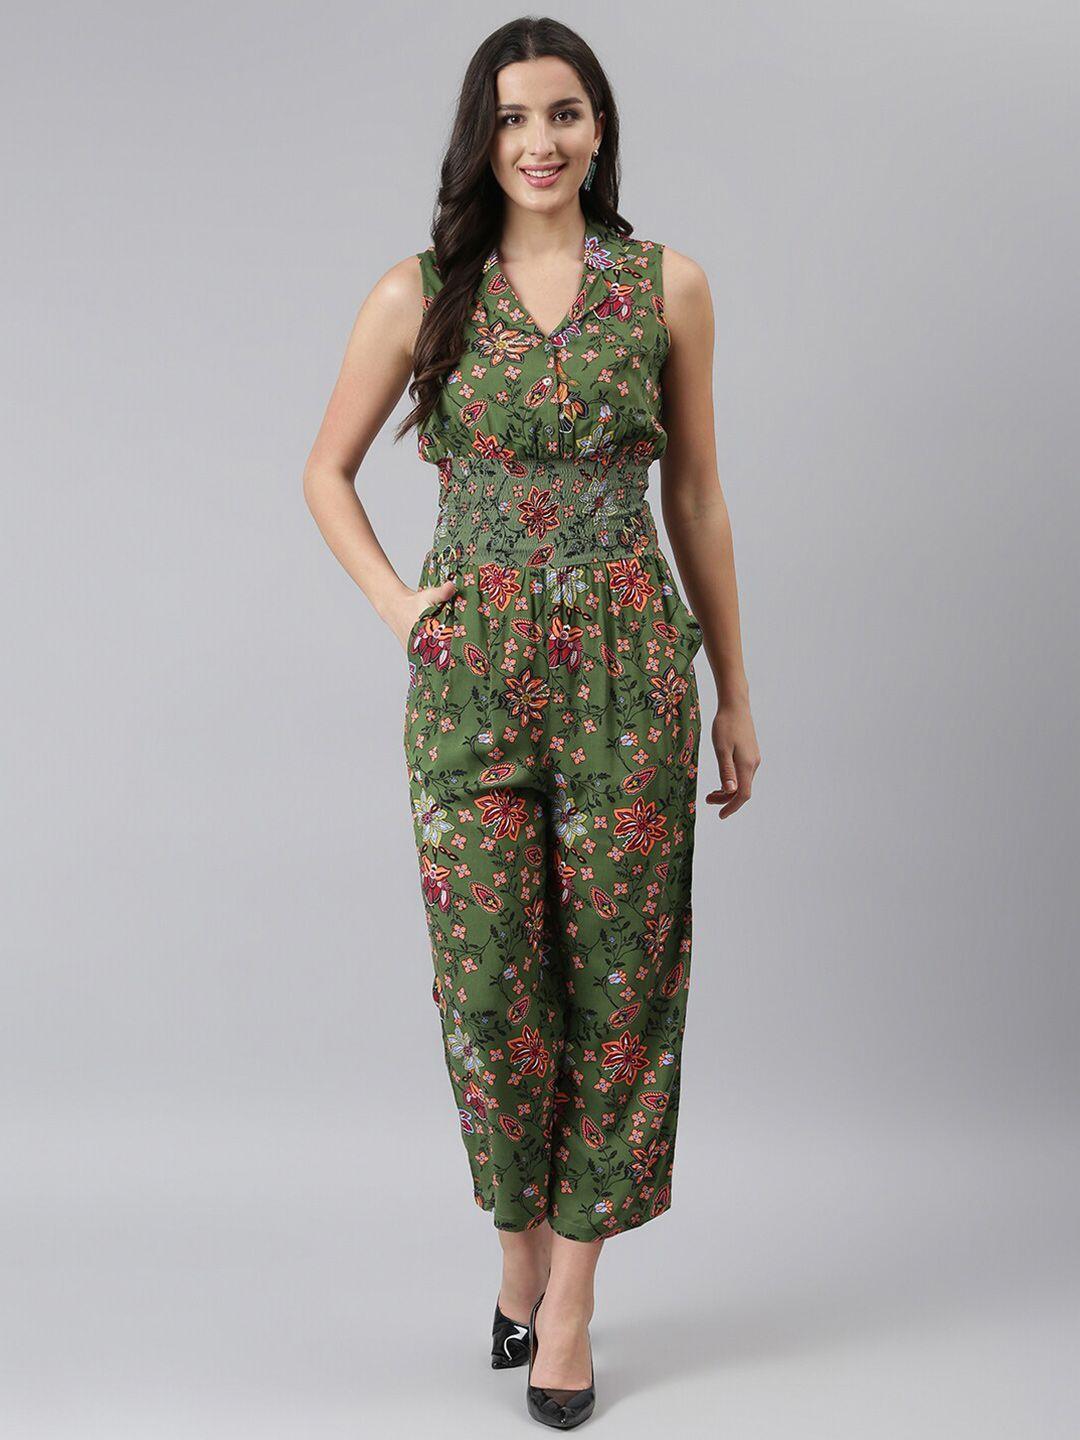 deebaco olive green & red printed culotte jumpsuit